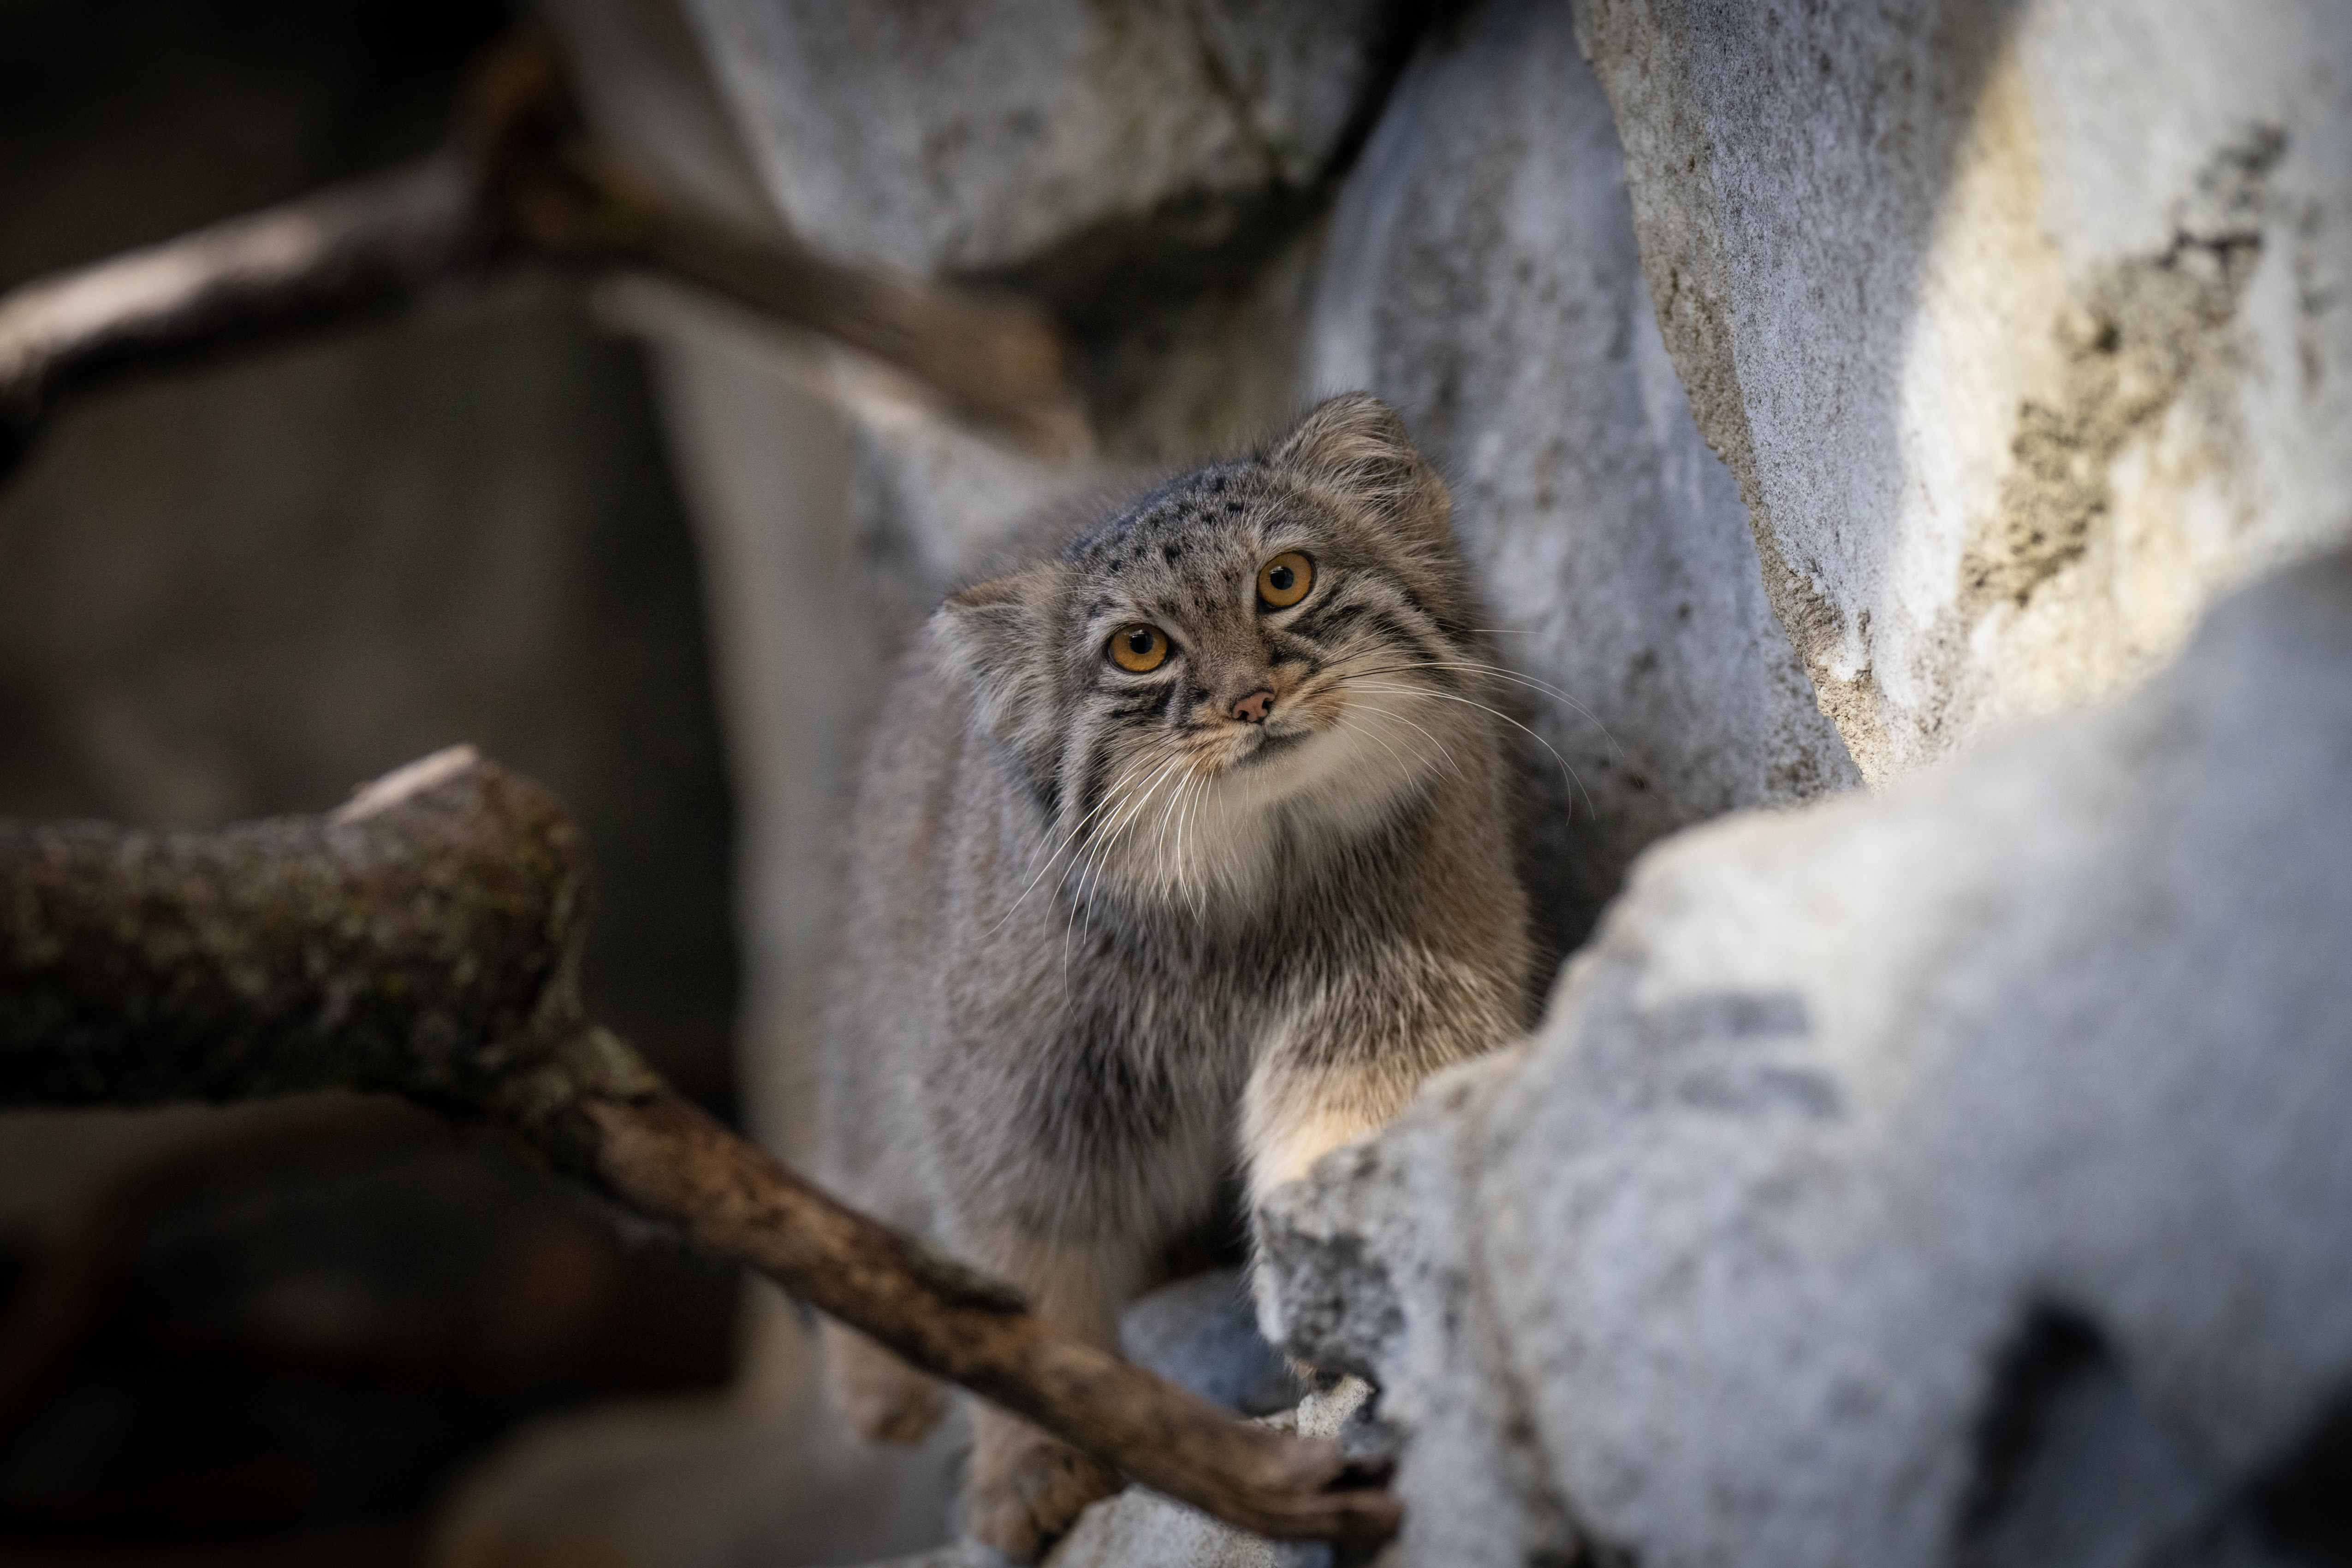 Know Your Cat - Pallas Cat